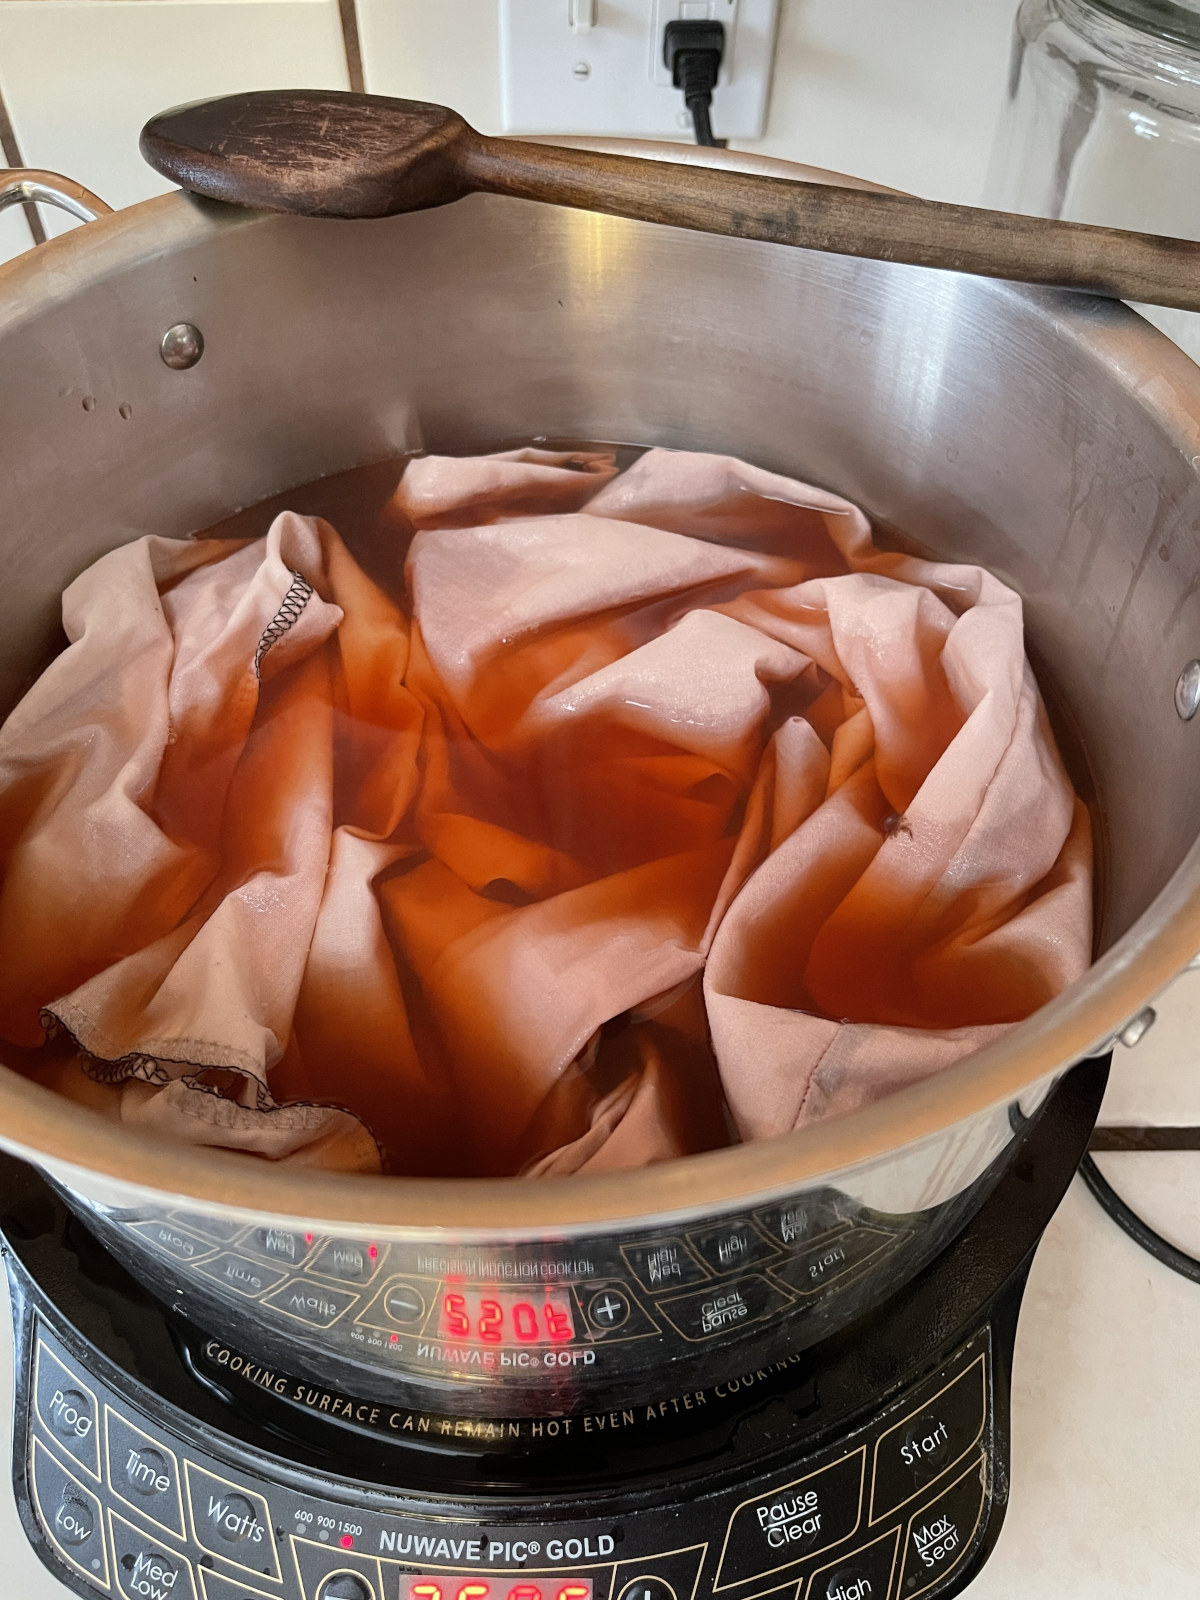 Reusable cloth produce bags sit in a large silver pot filled with avocado pit dye. The pot sits on and induction cooktop.